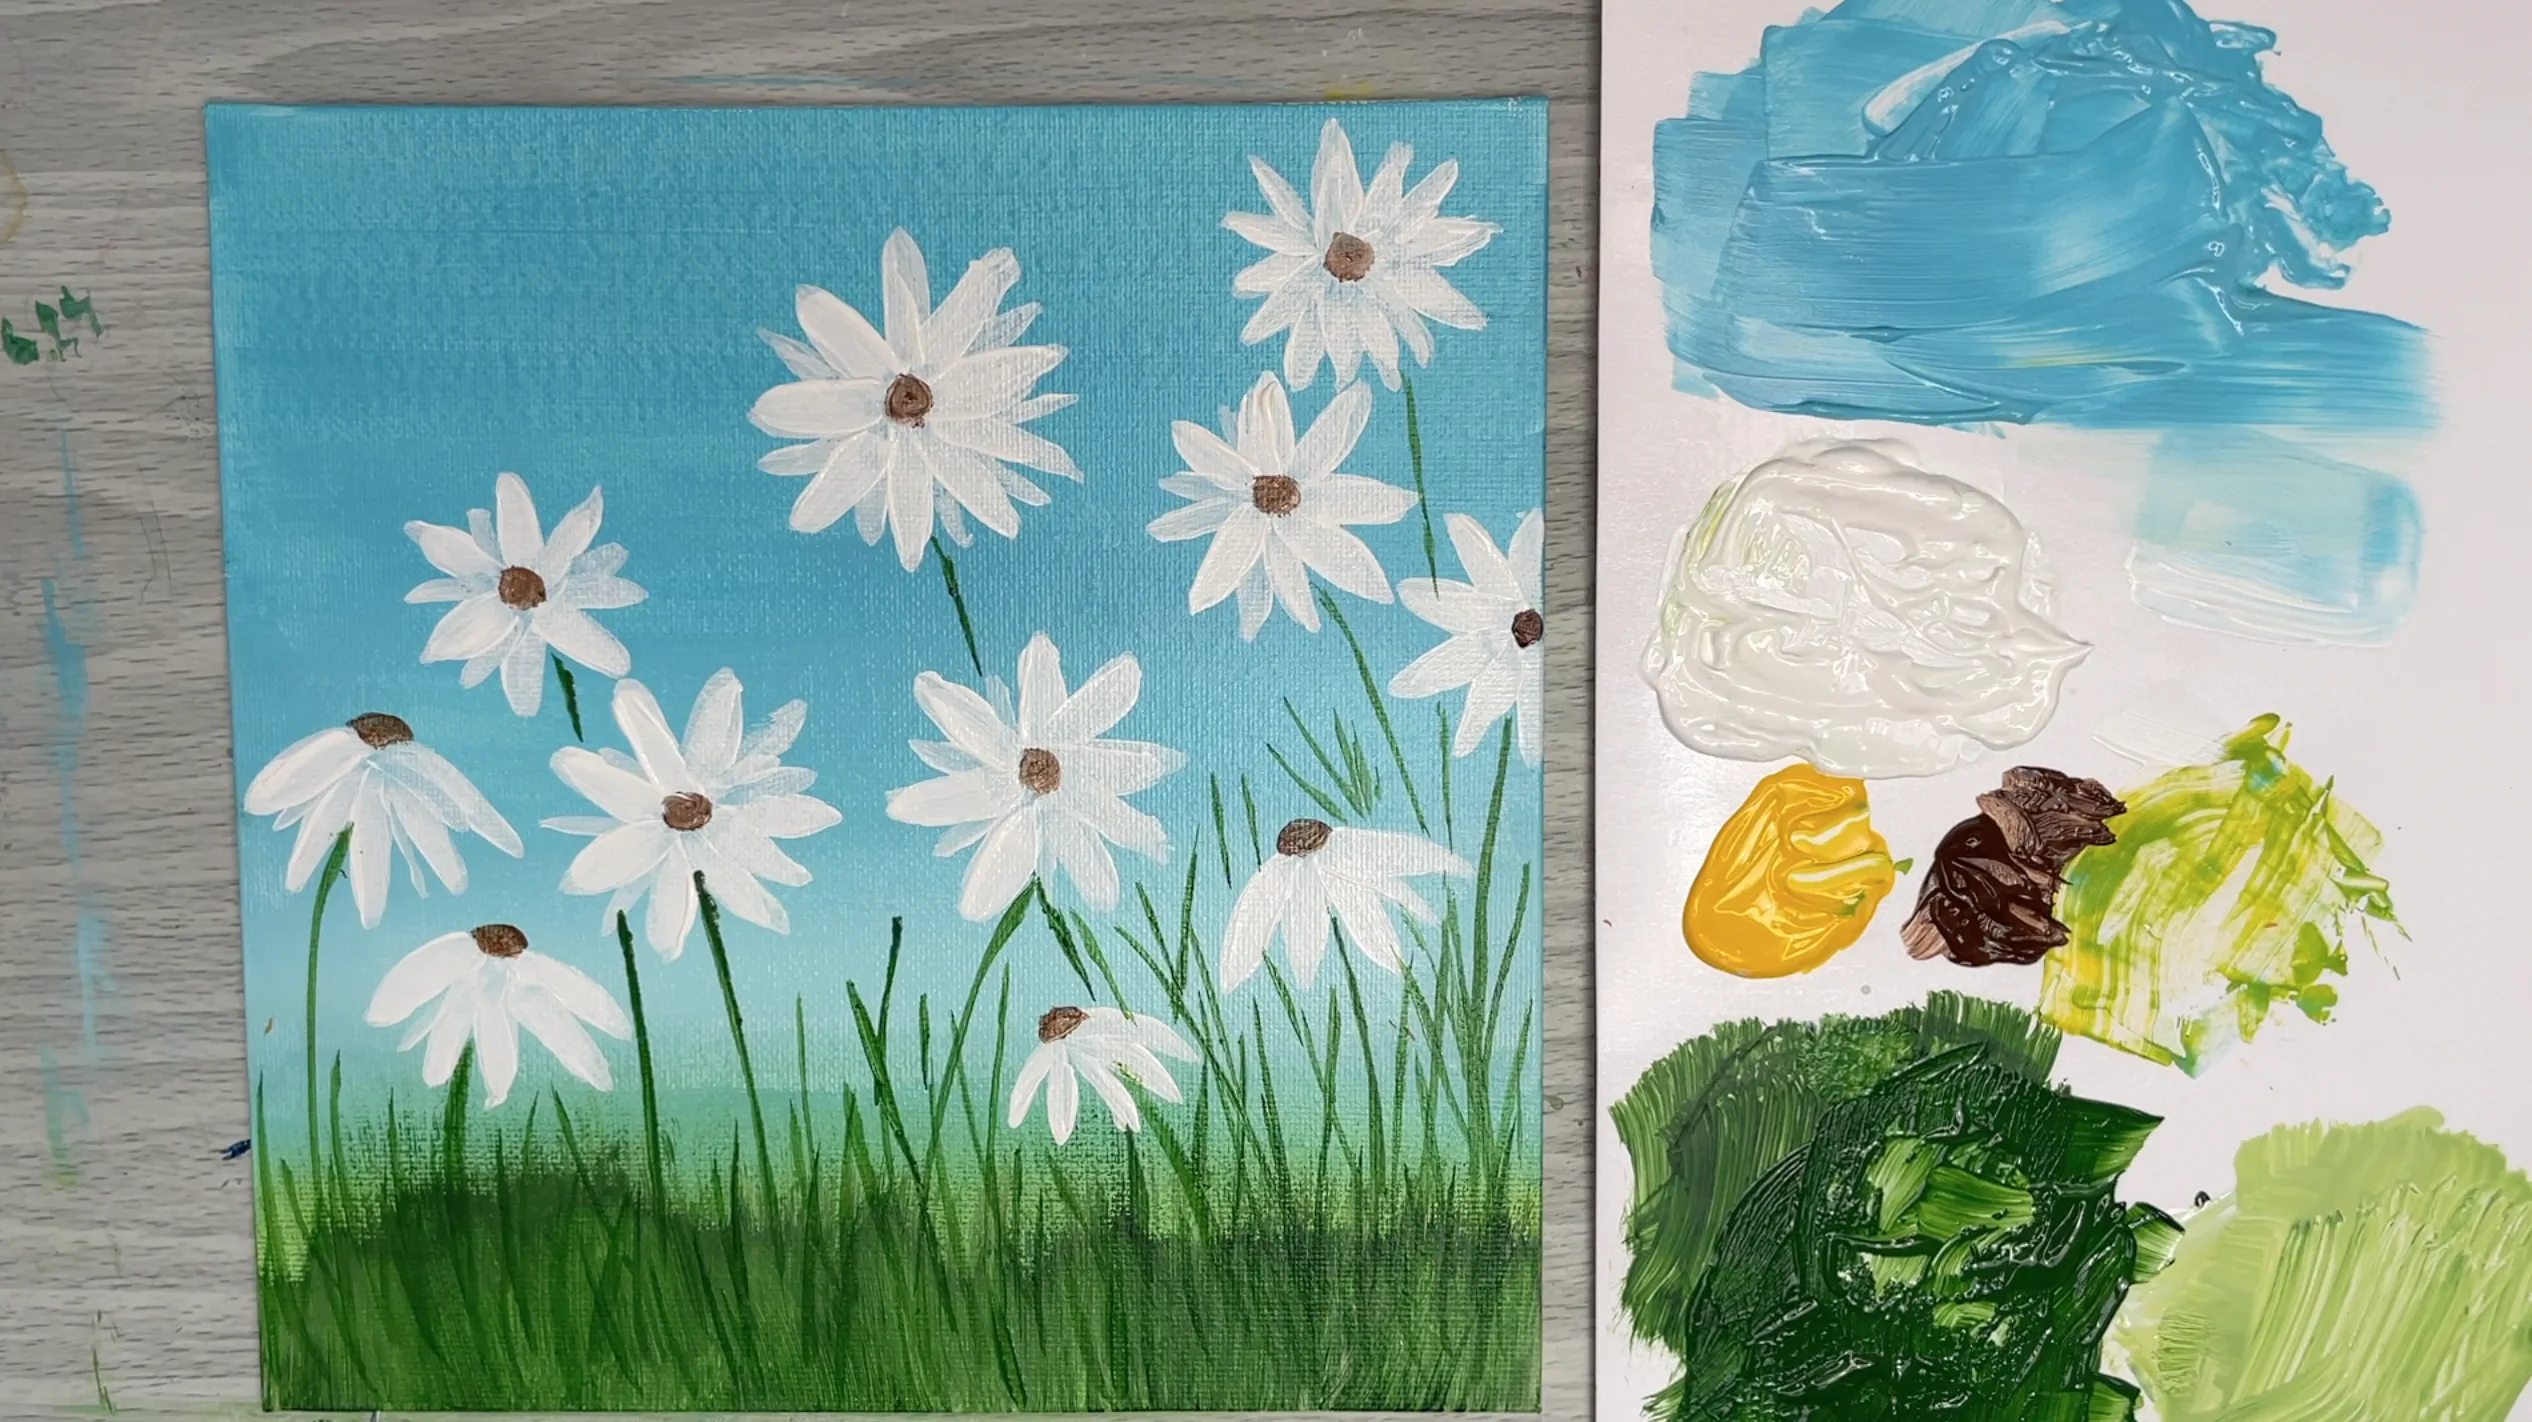 How to paint daisy field with blades of grass